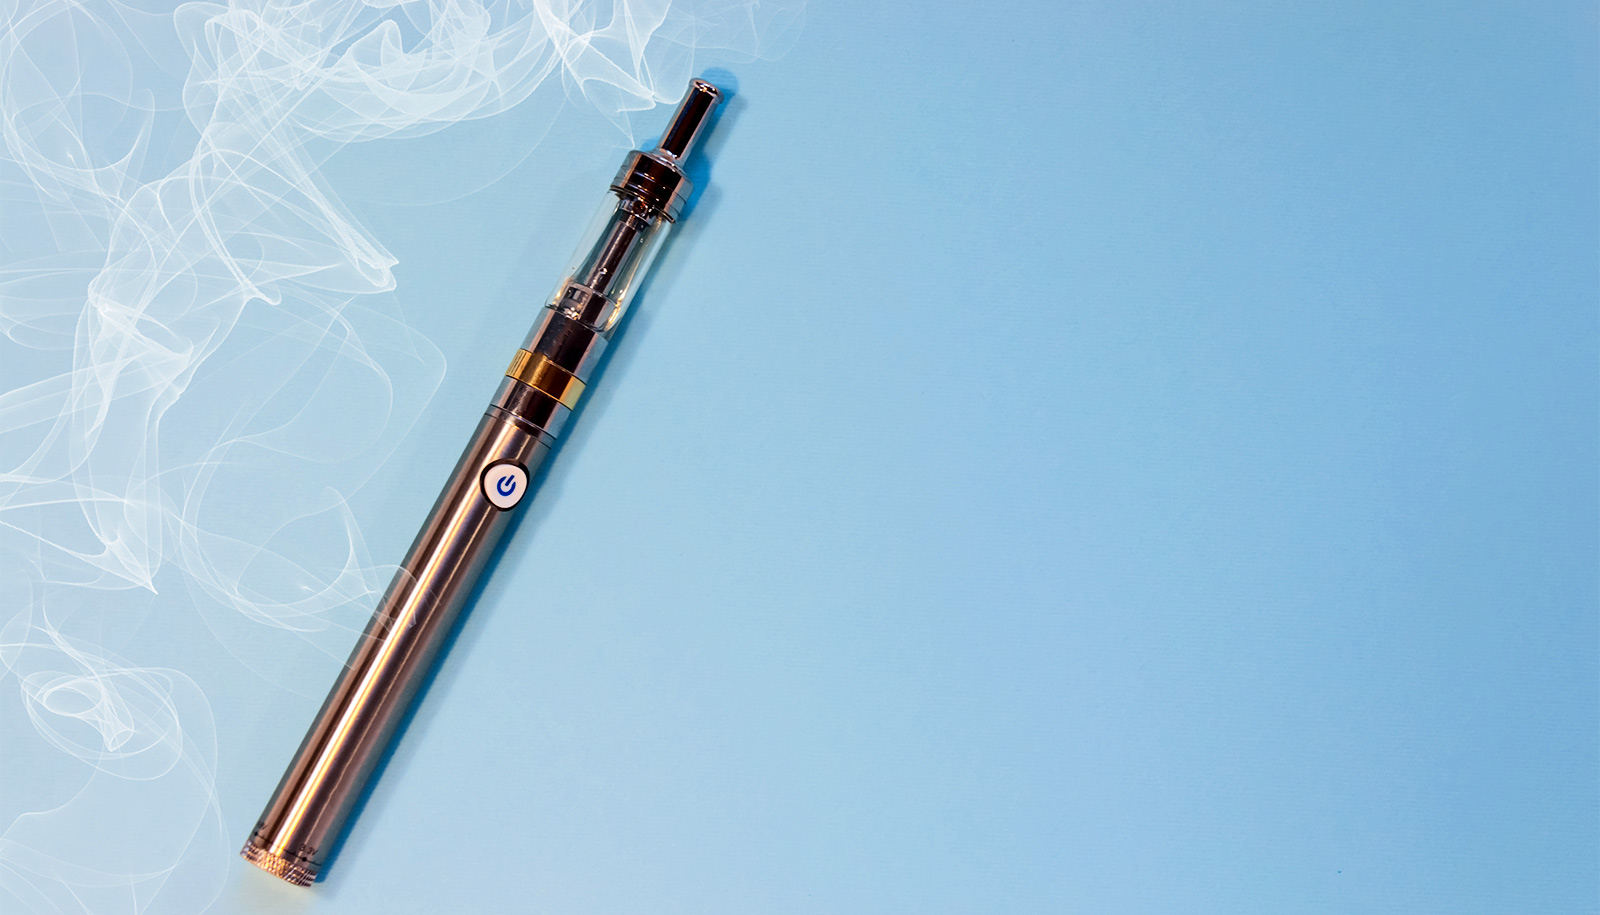 Vaping can effectively help adults stop smoking